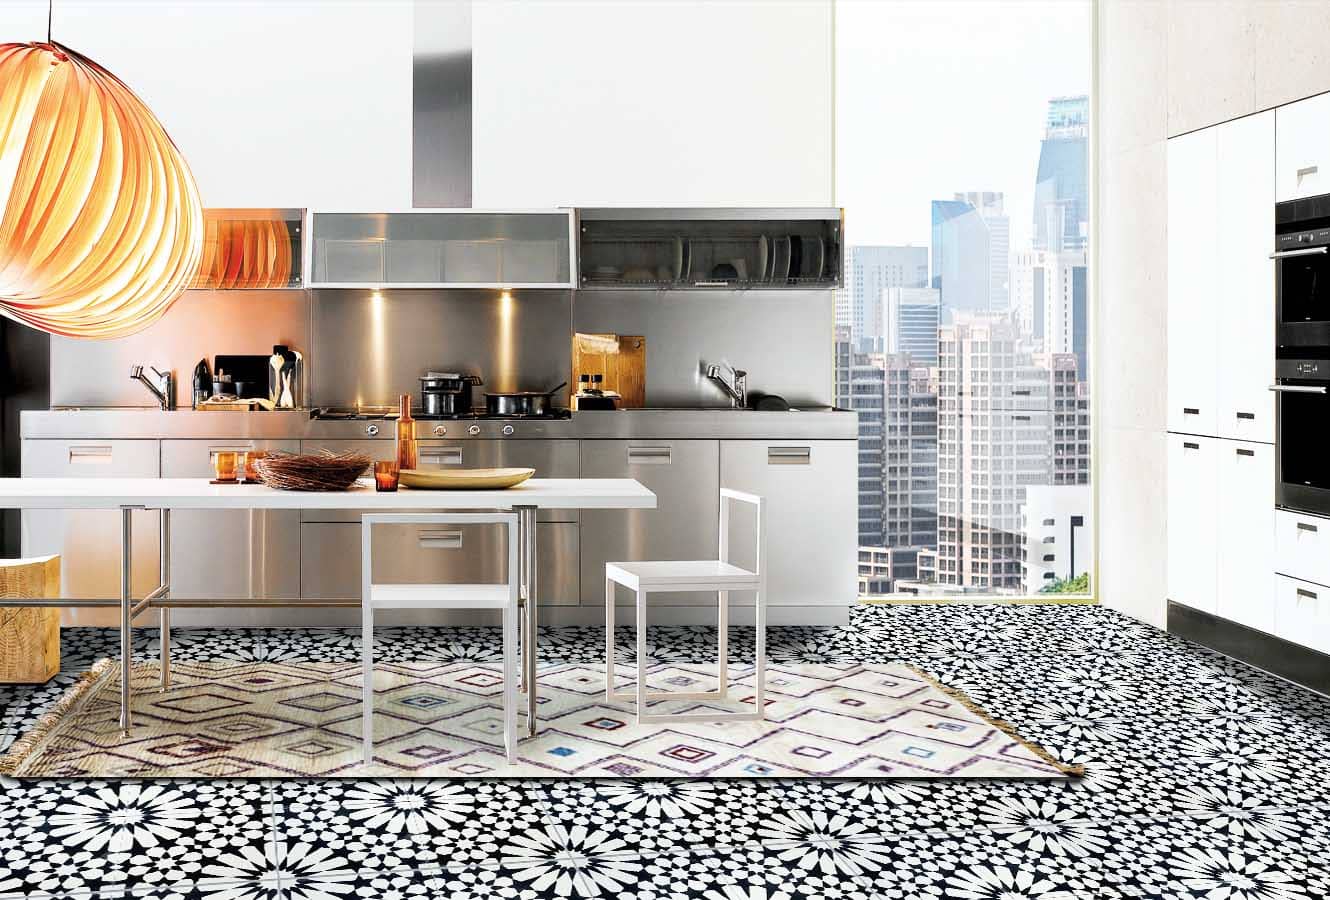 Kitchen with Moroccan Tile flooring